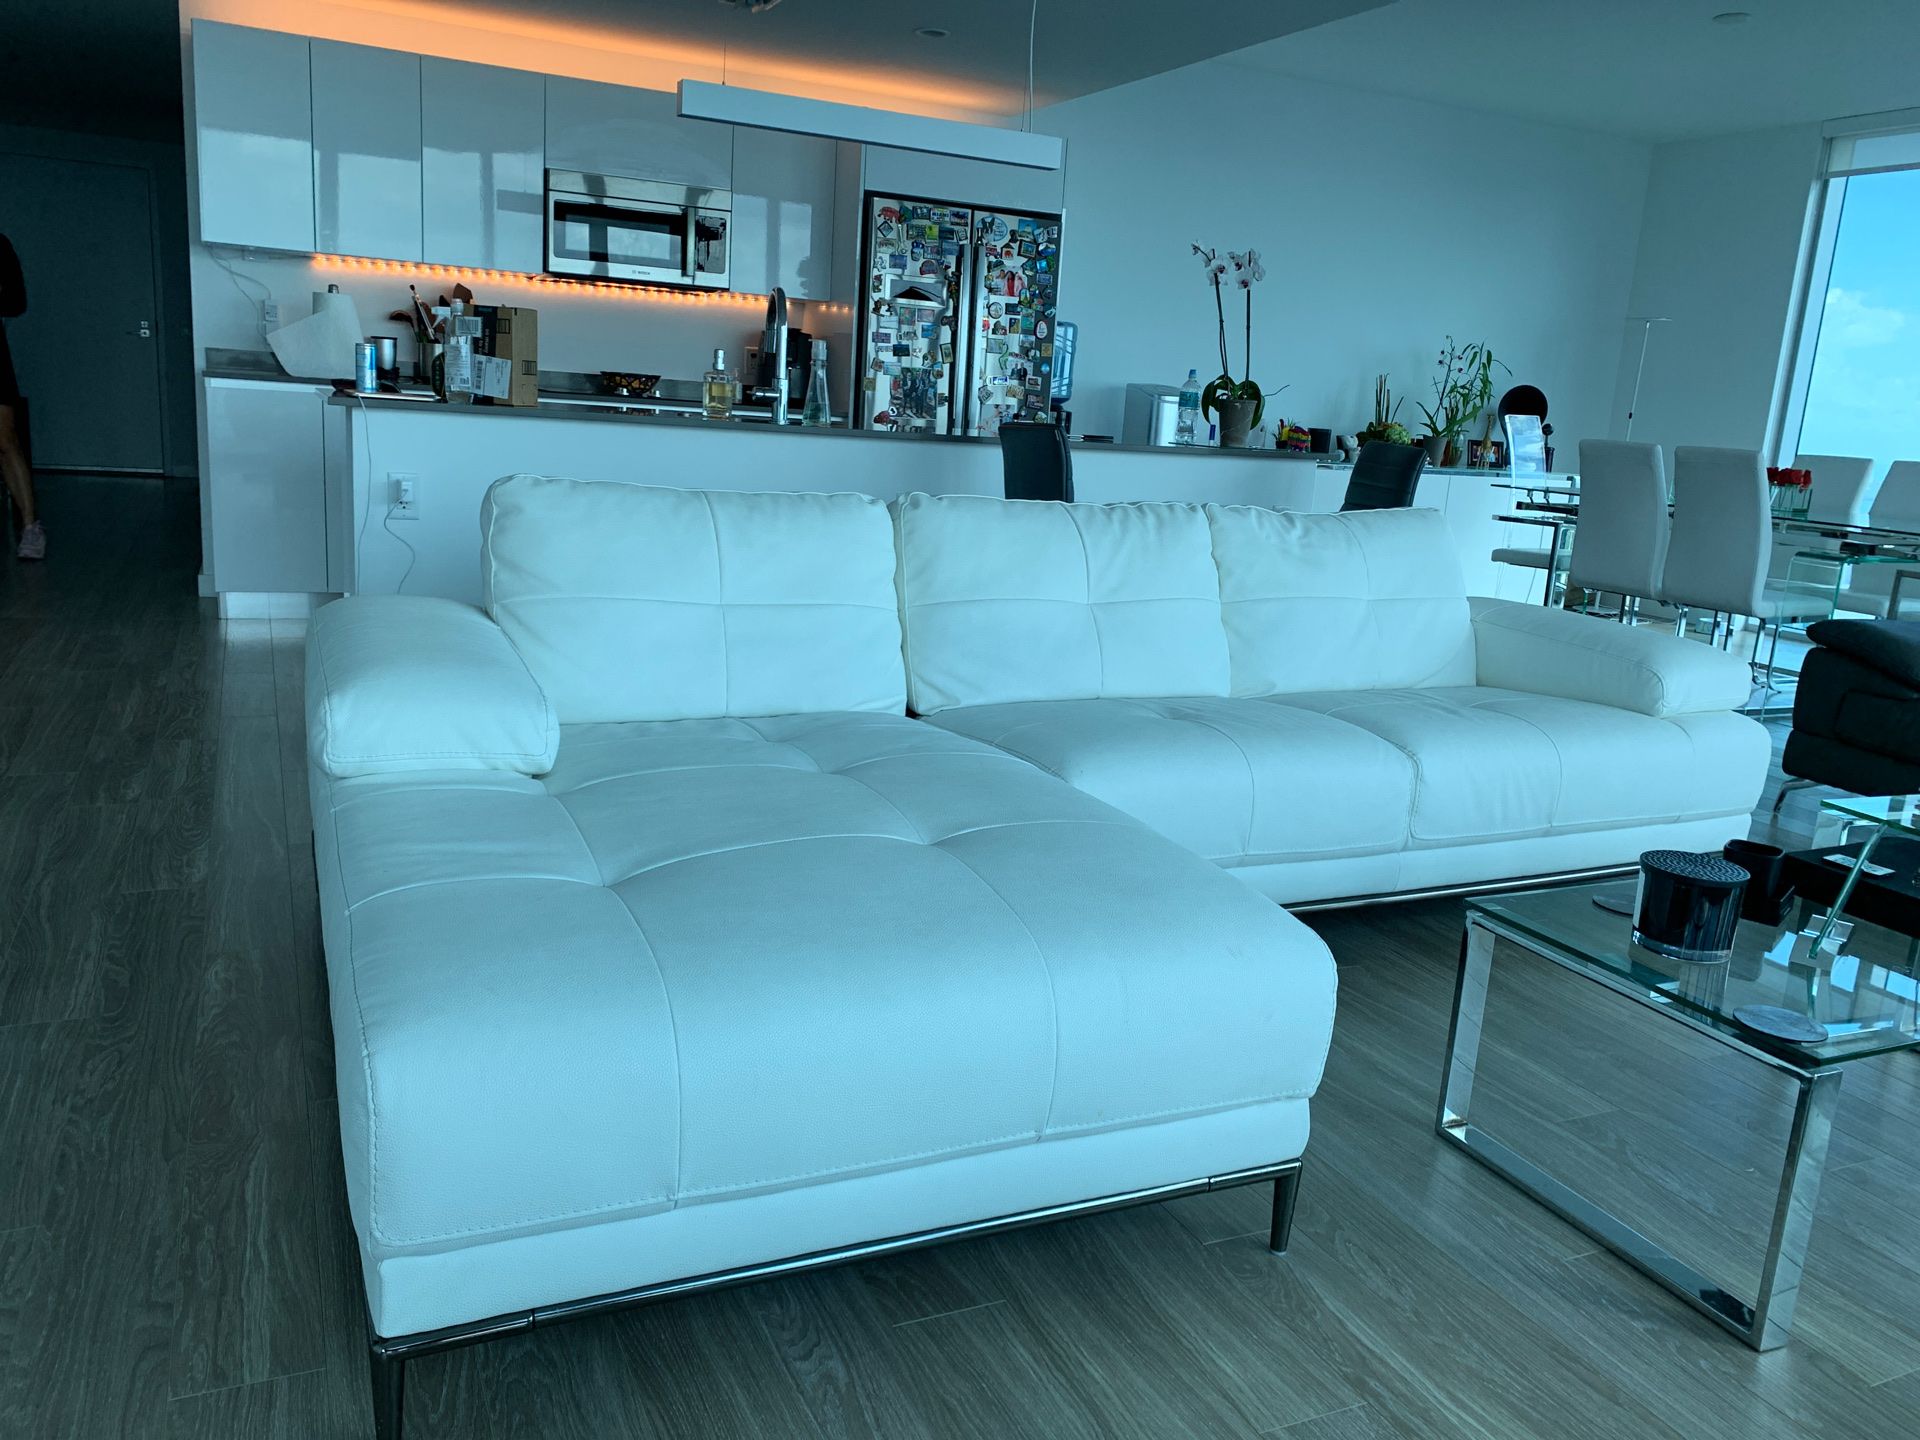 Like new white leather couch